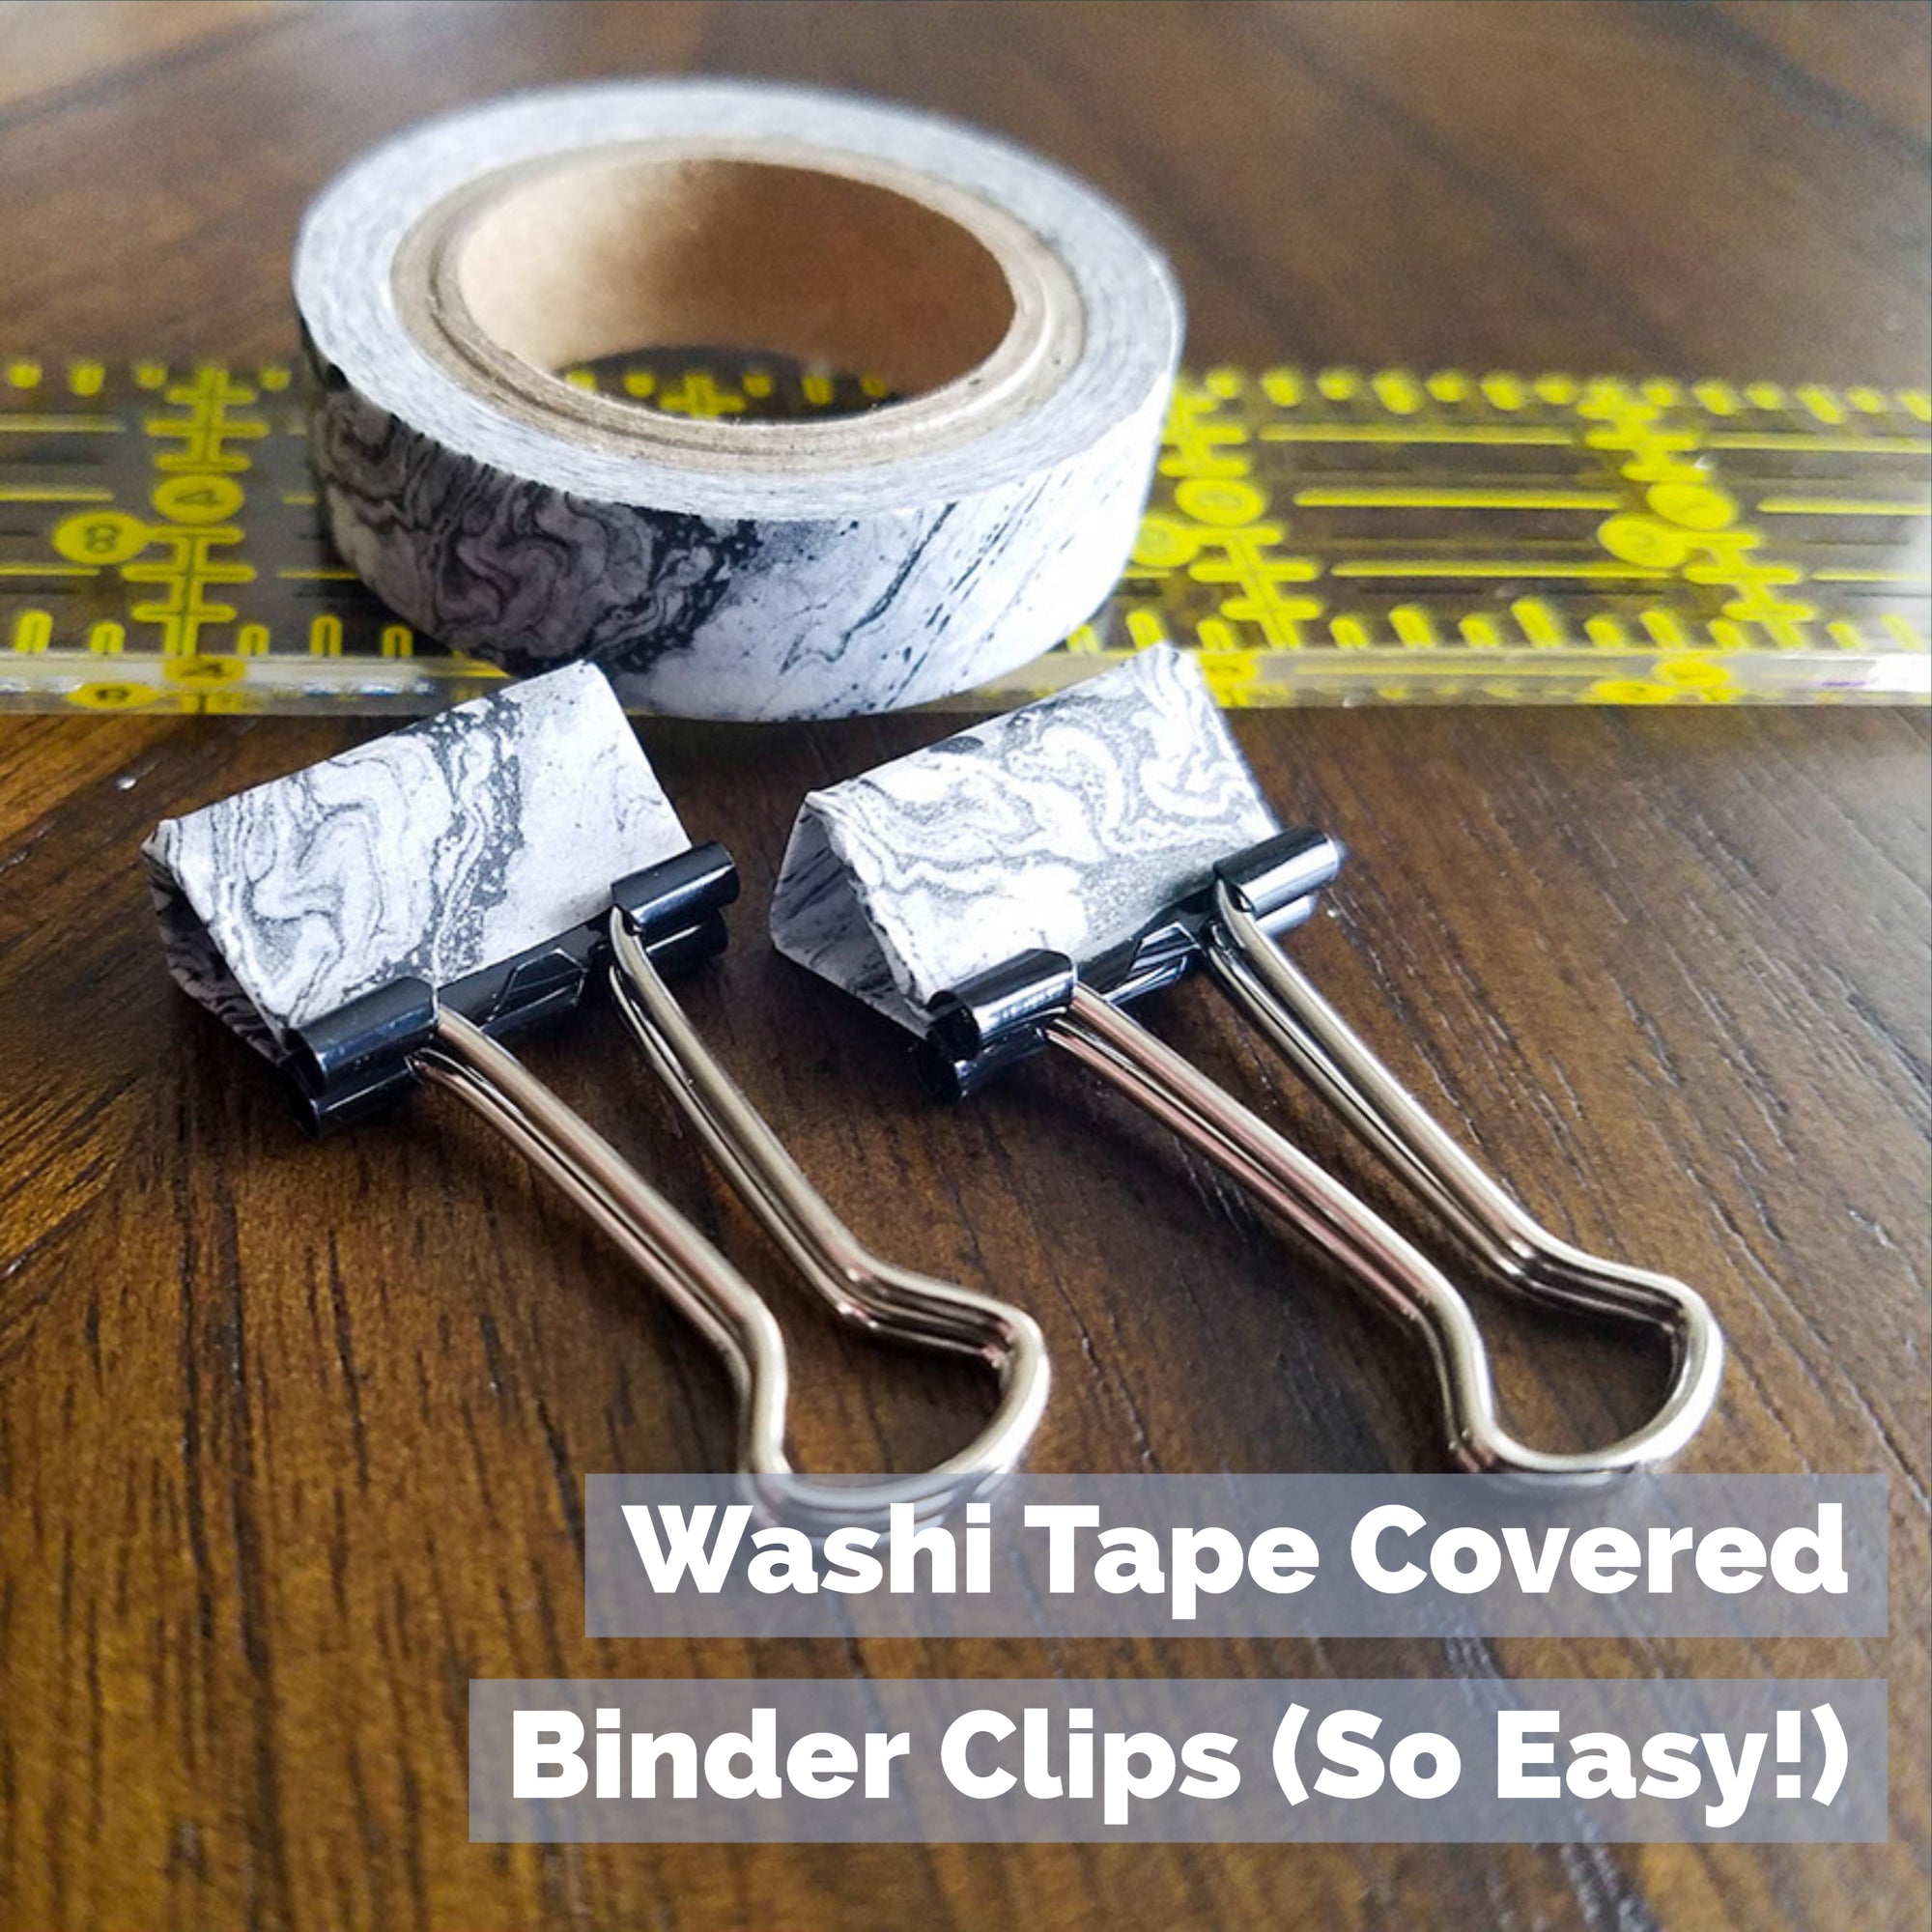 Make Your Own Washi Tape Covered Binder Clips